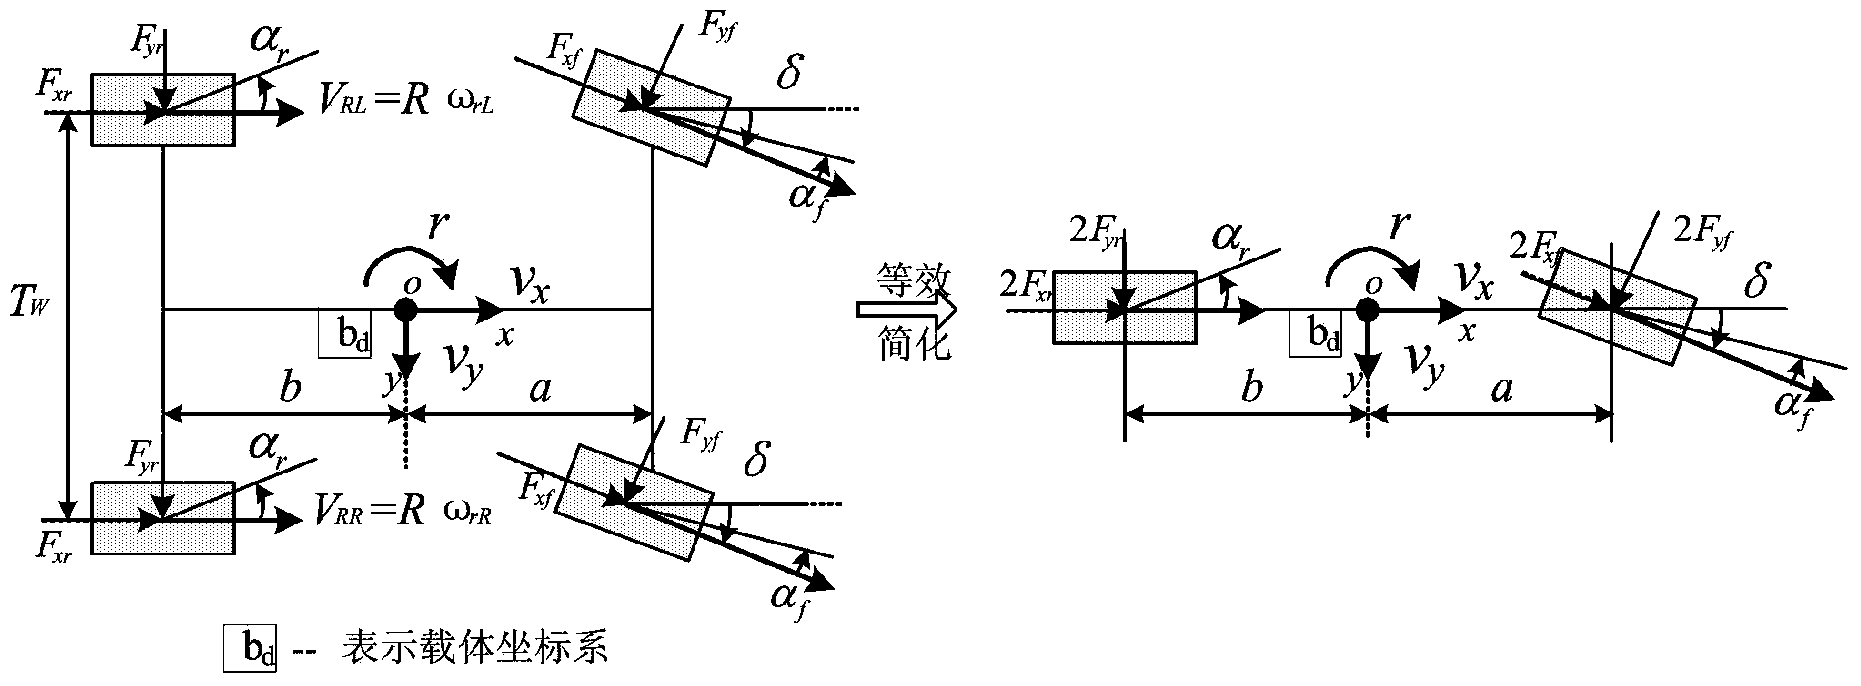 Joint estimation method of travel speed and road attachment coefficient